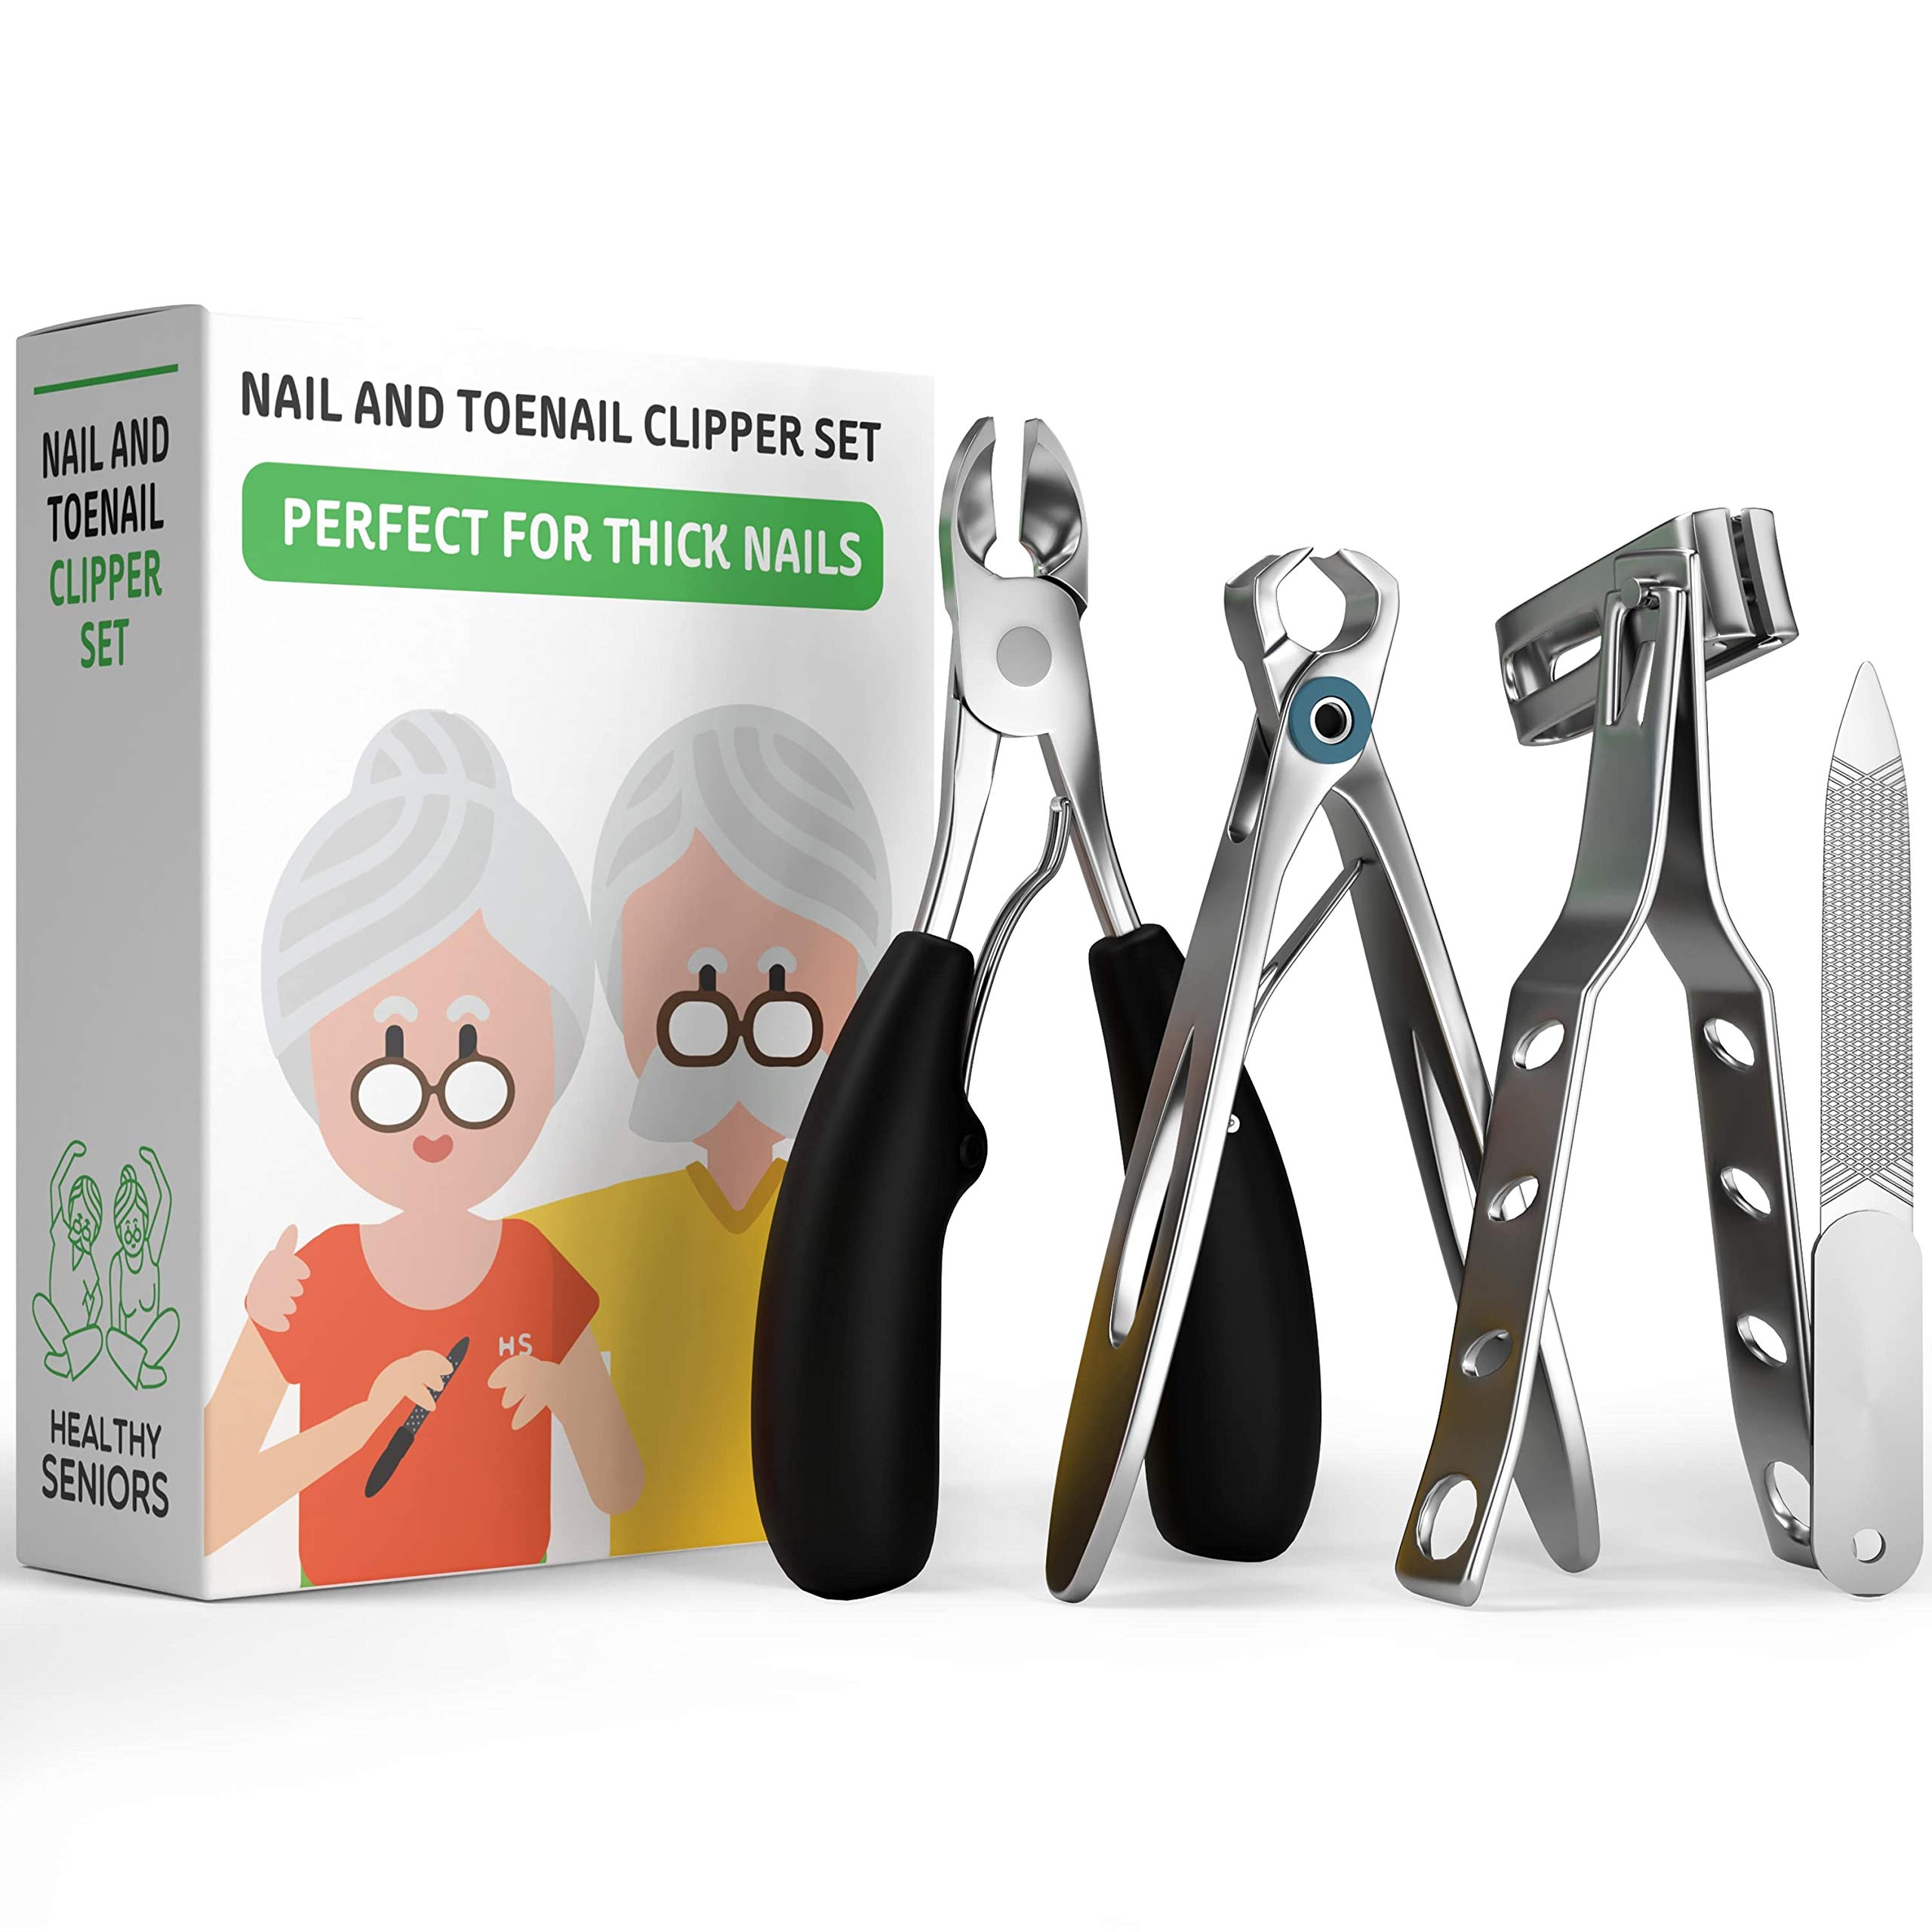 Healthy Seniors Complete Nail and Toenail Clipper Set - Designed for Thick  Nails. Perfect for Diabetics or